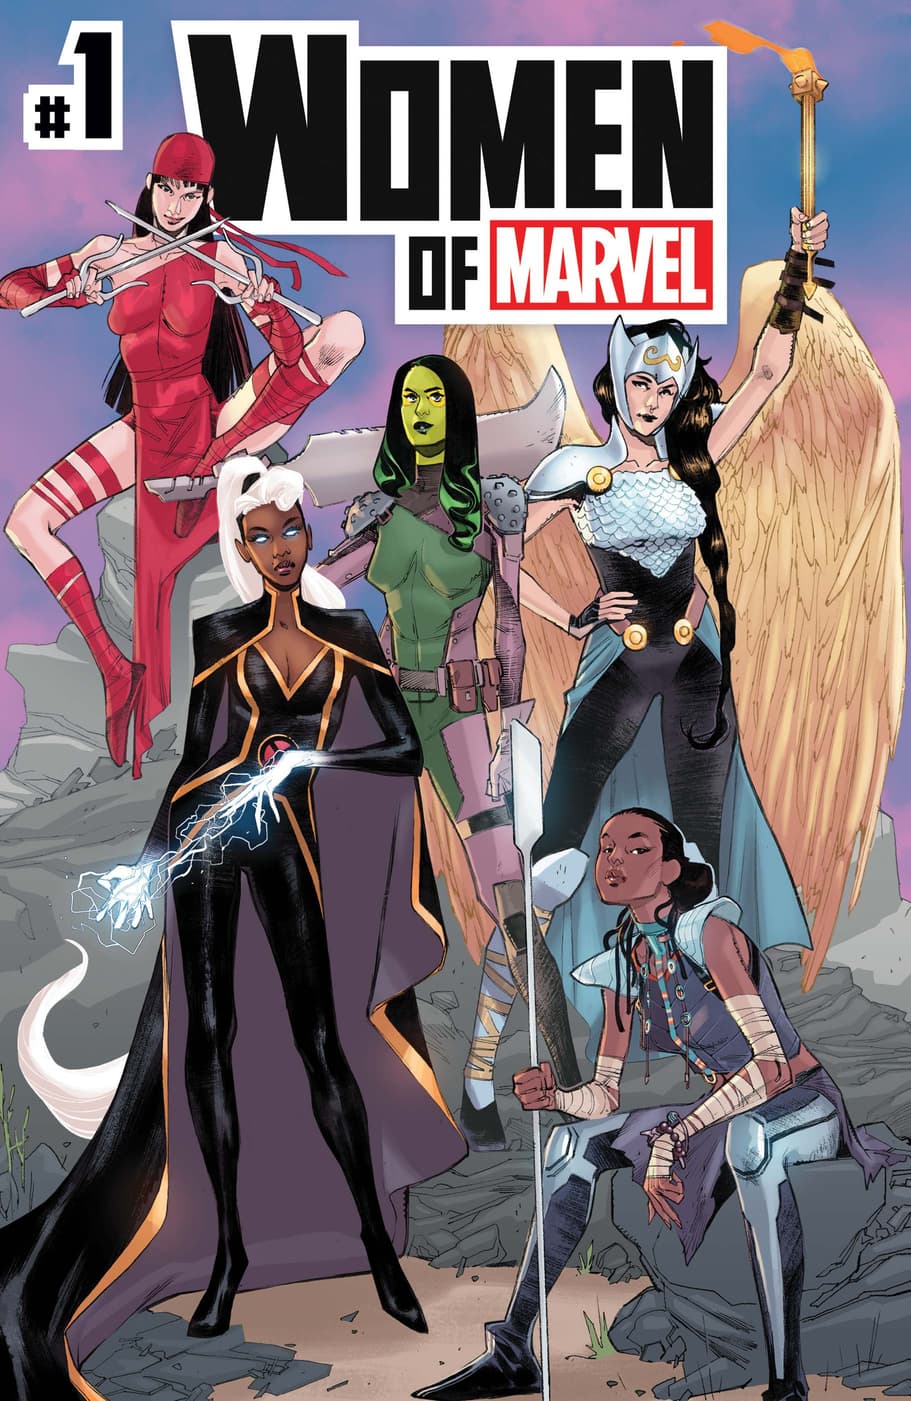 WOMEN OF MARVEL #1 cover by Sara Pichelli